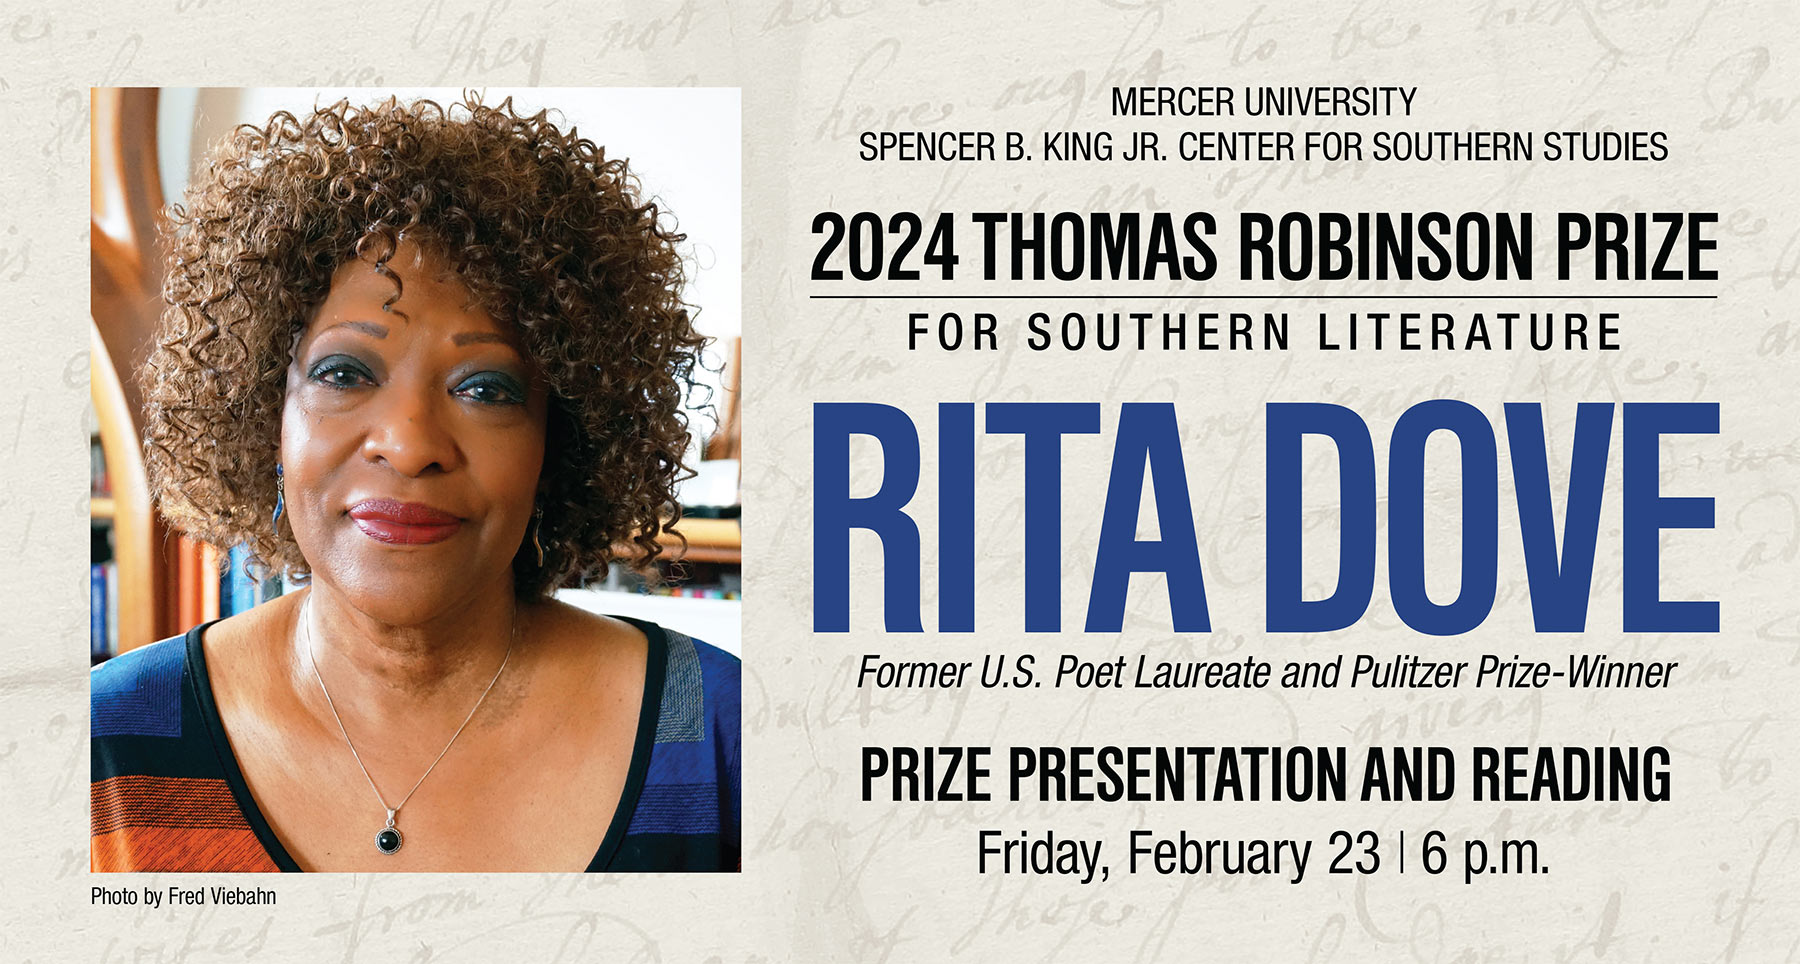 2024 Thomas Robinson Prize for Southern Literature